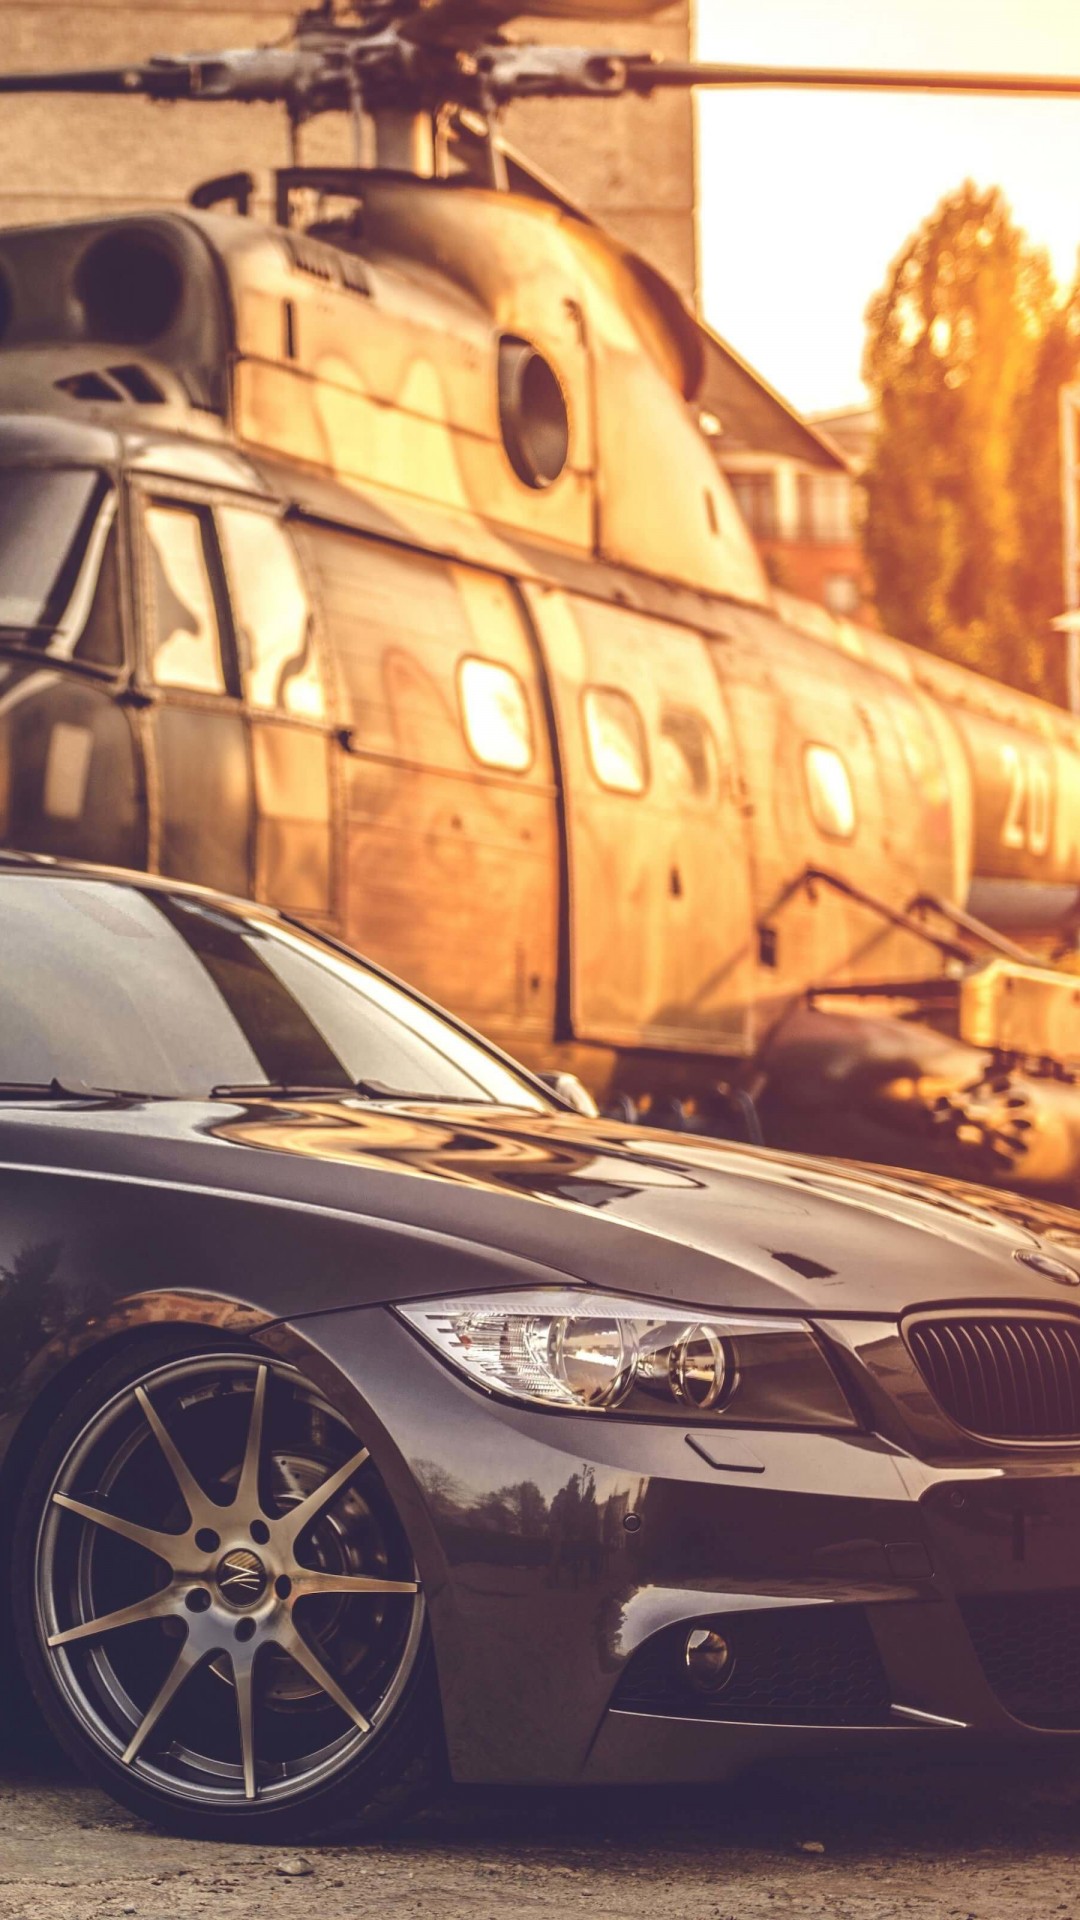 BMW E90 on Z-Performance Wheels Wallpaper for SAMSUNG Galaxy Note 3